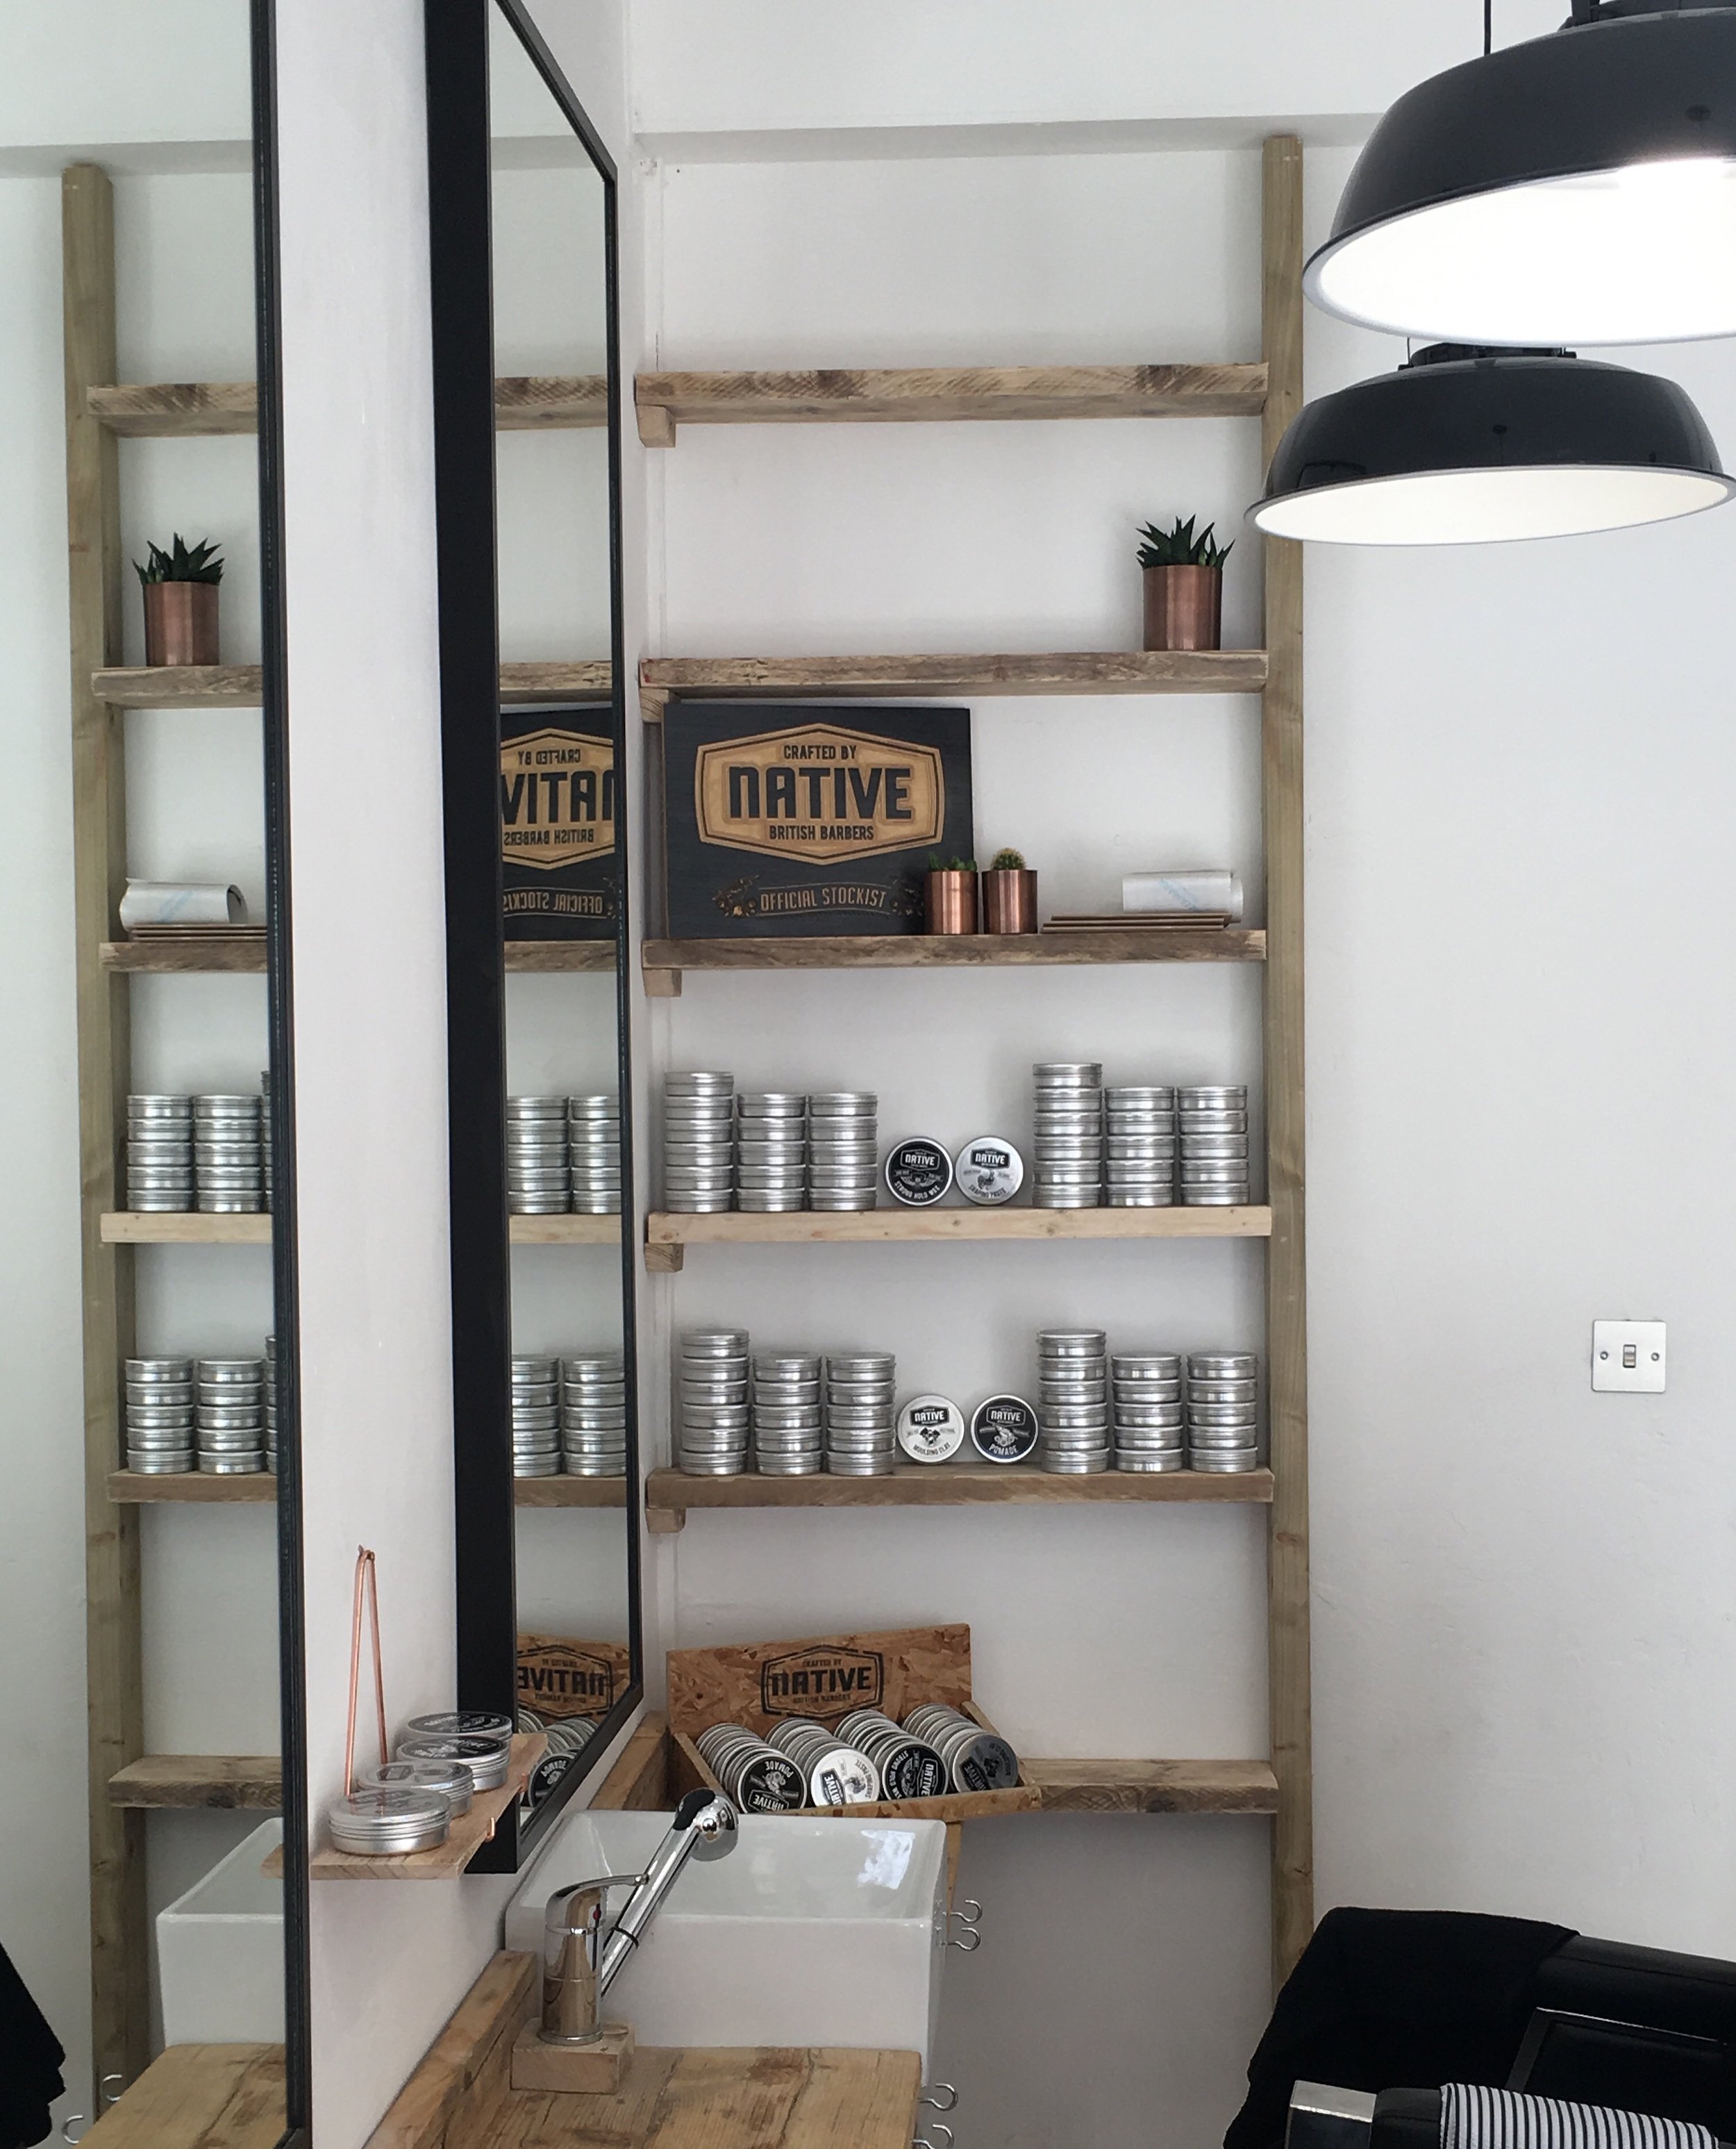 Native Products display at e-street barbers hackney